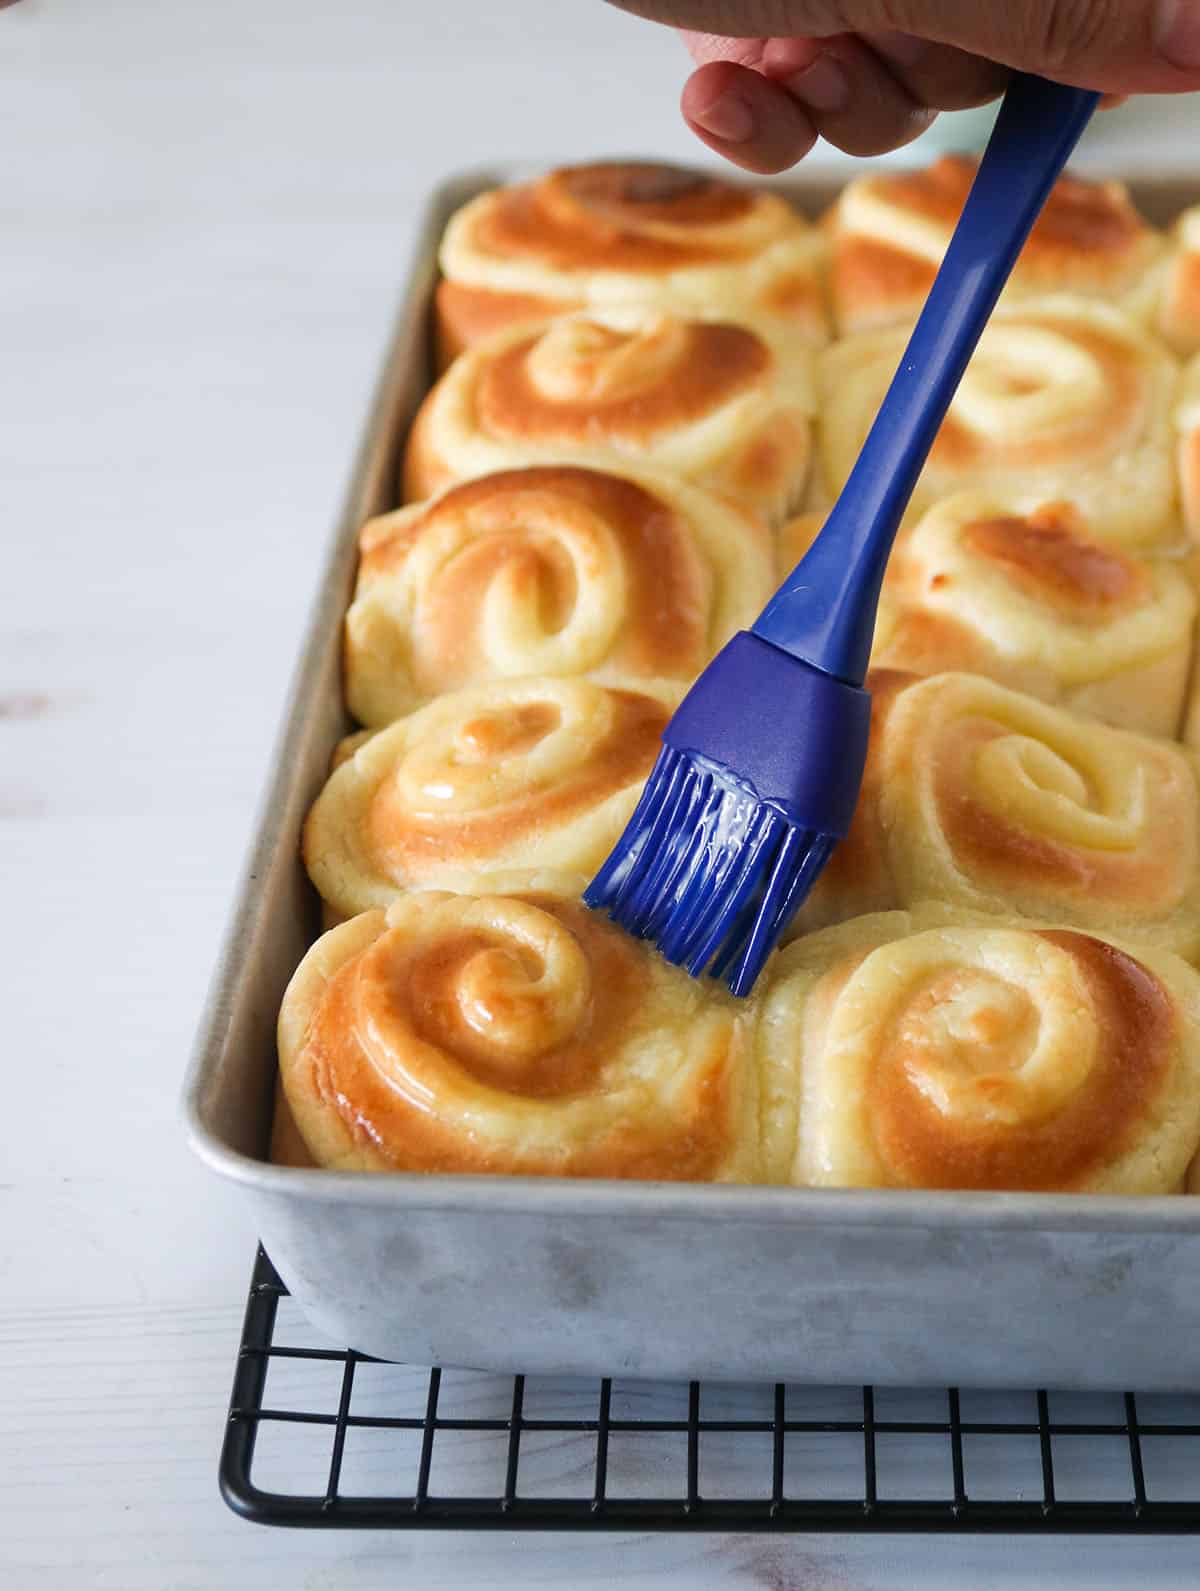 Brushing melted butter on the baked buns.